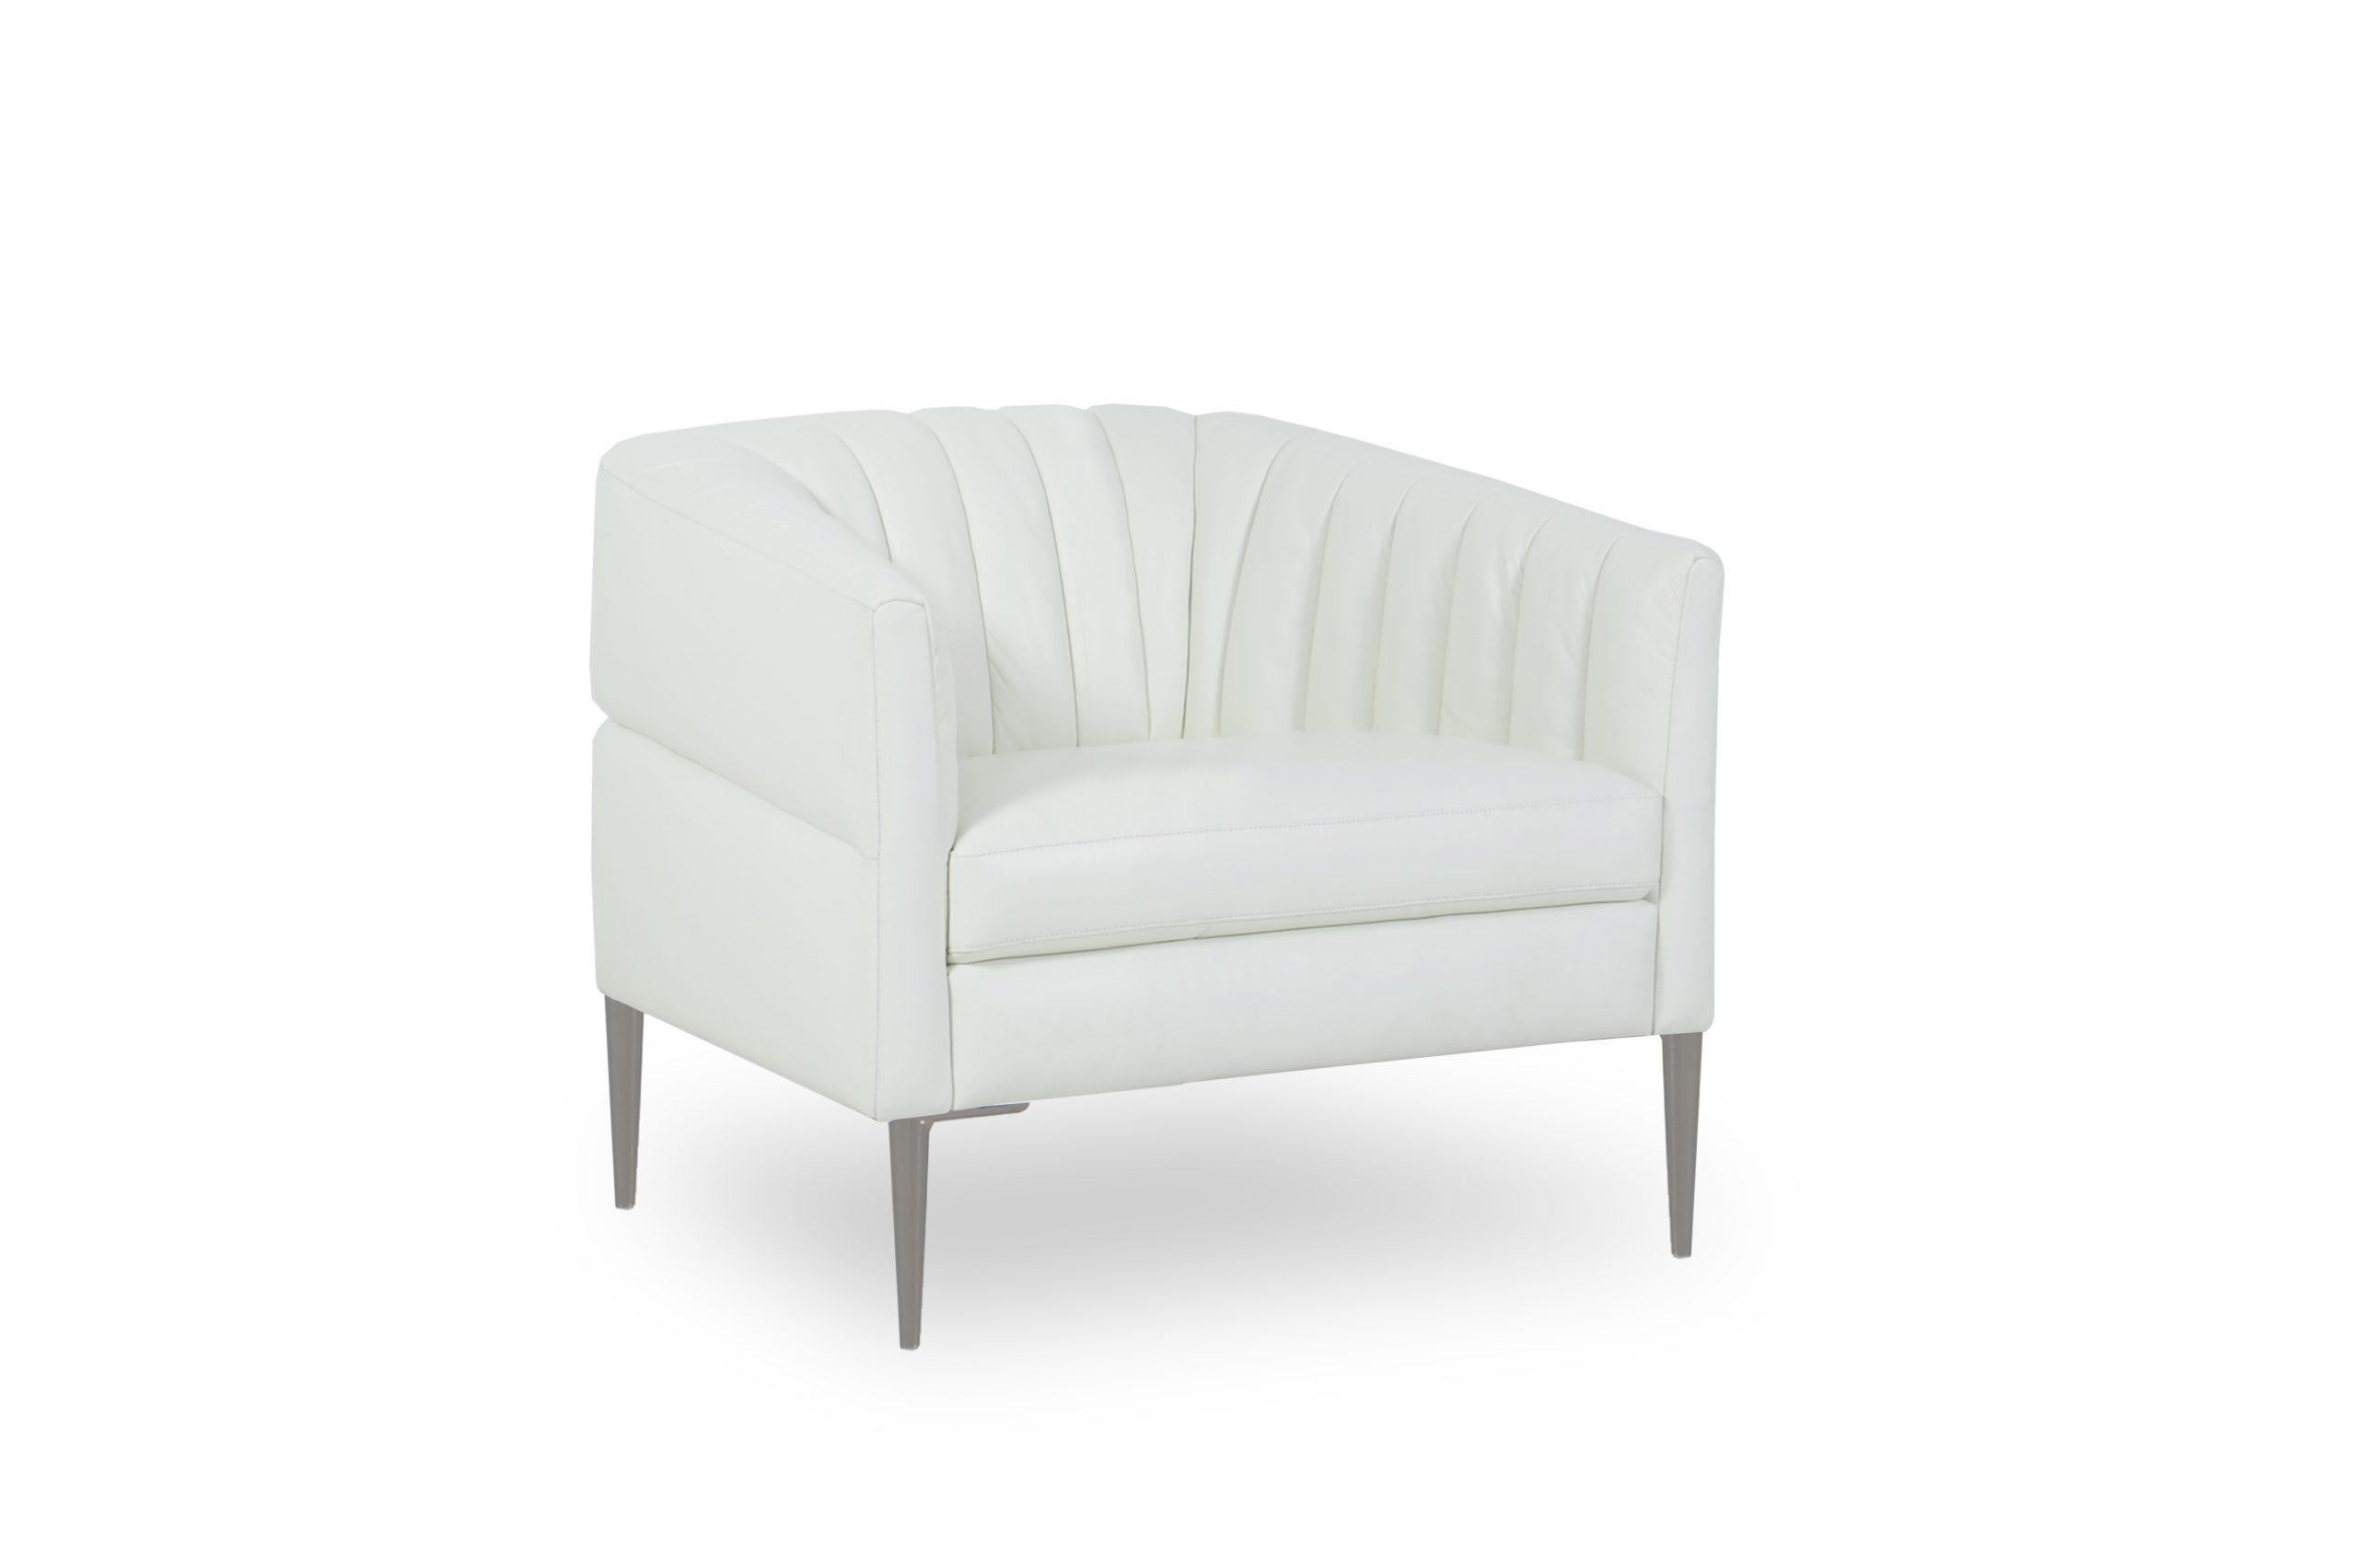 Contemporary, Modern Arm Chair 441 - Pearl 44101BS1296 in Pearl White Top grain leather